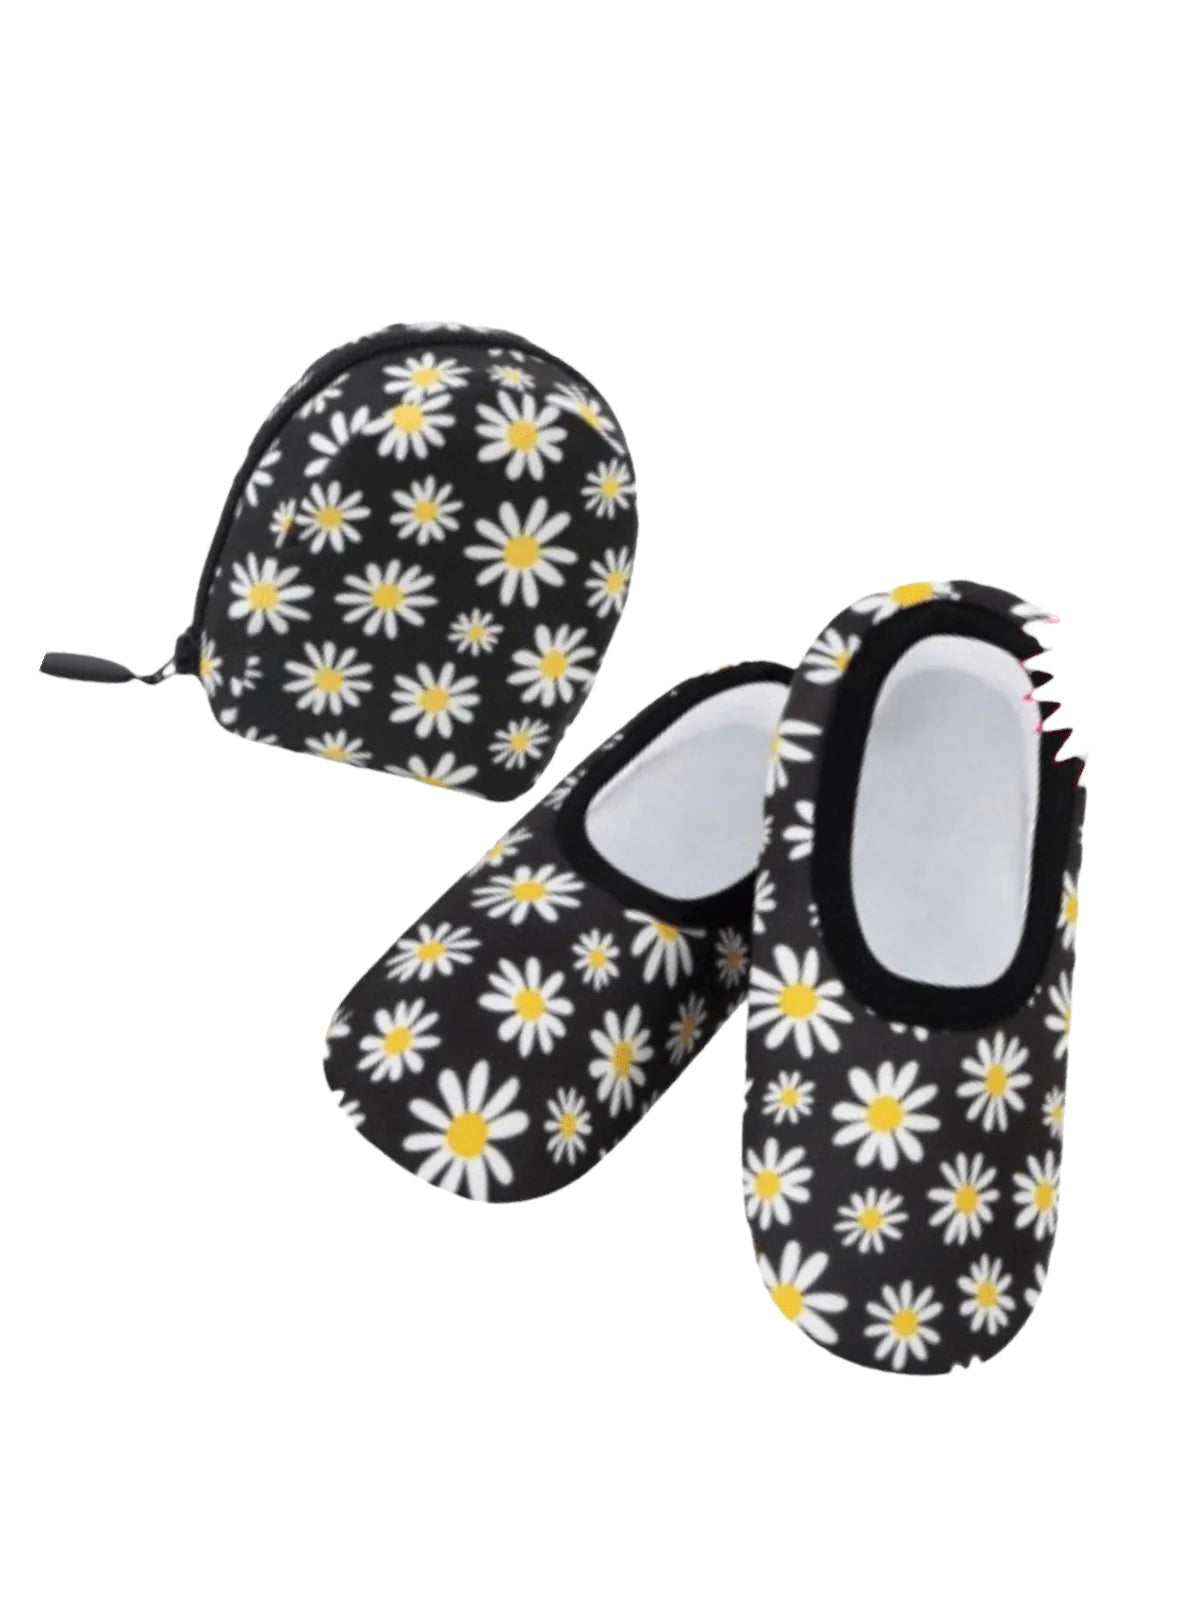 Snoozies Skinnies Black and White Daisy